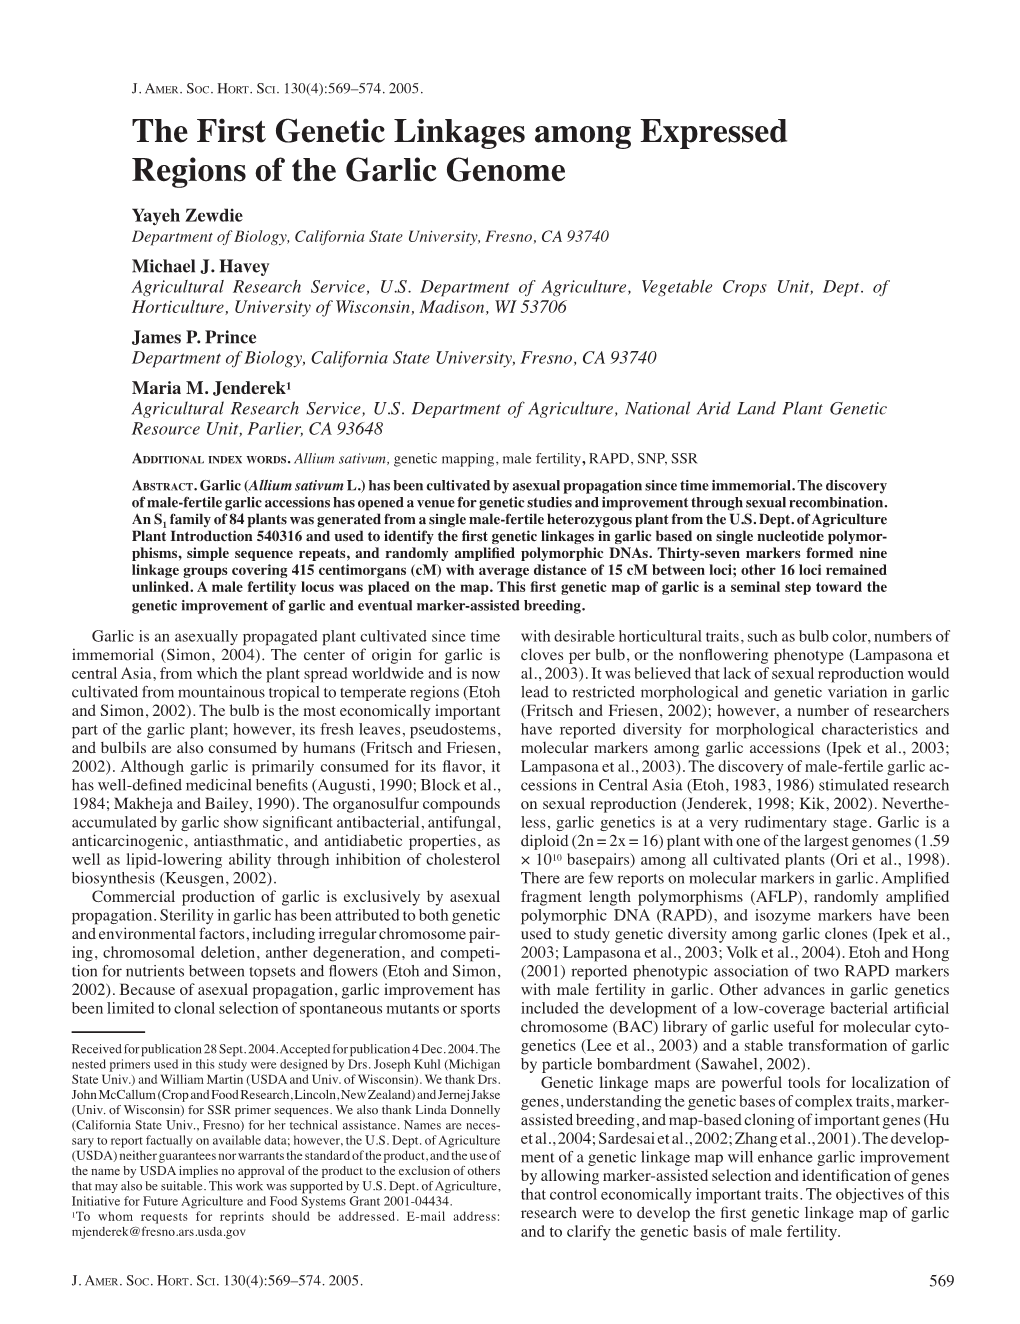 The First Genetic Linkages Among Expressed Regions of the Garlic Genome Yayeh Zewdie Department of Biology, California State University, Fresno, CA 93740 Michael J